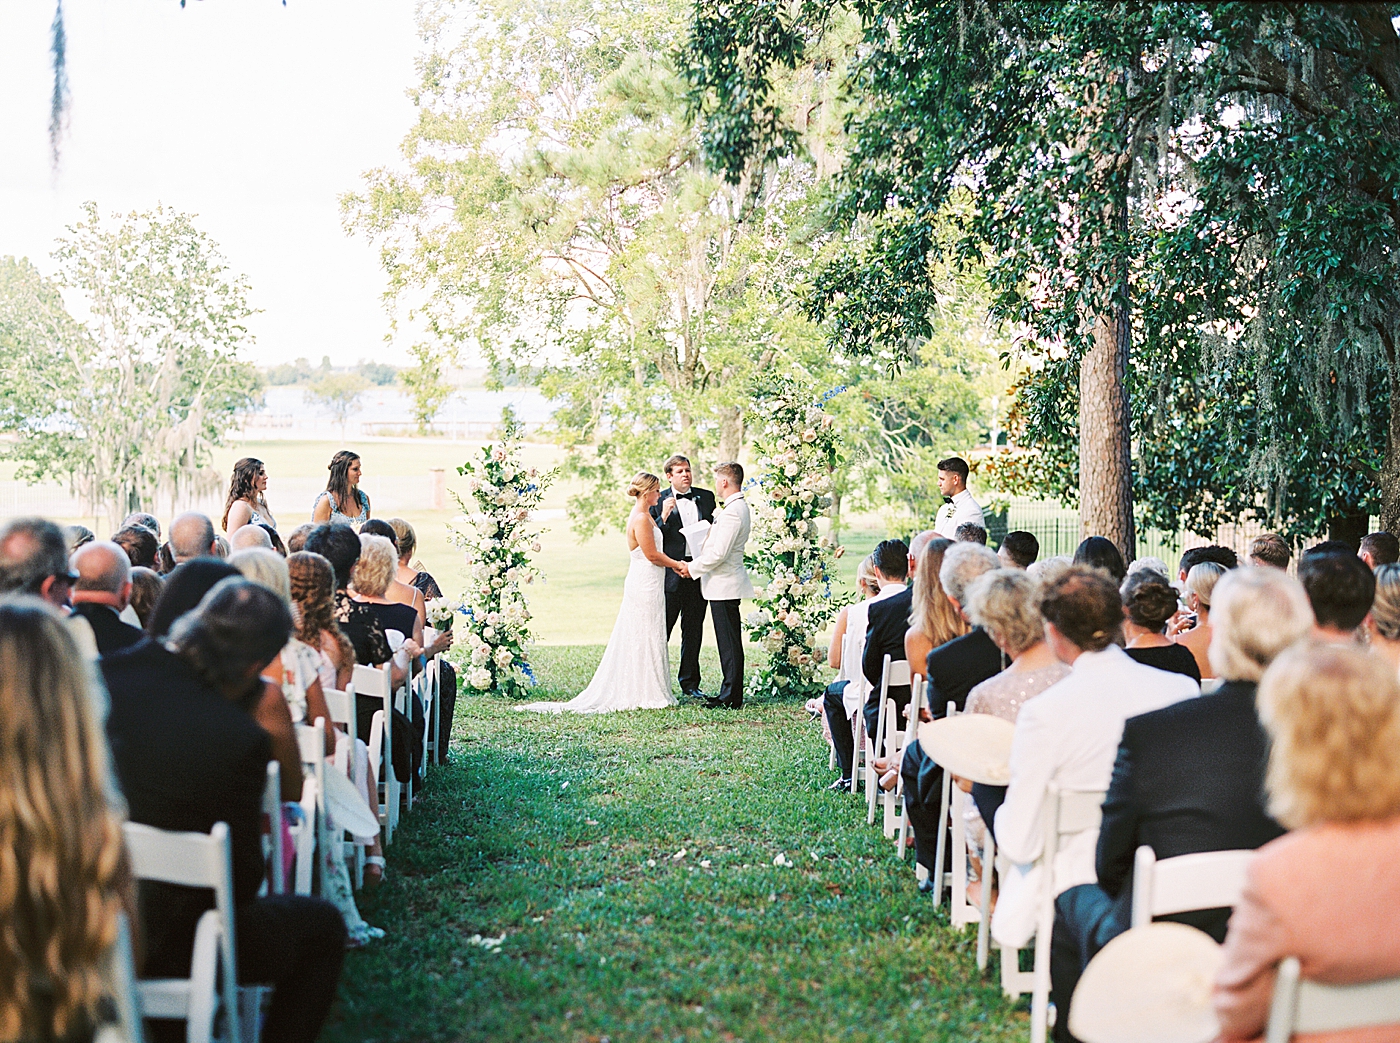 Beautiful outdoor ceremony during spring wedding | Images by Annie Laura Photography